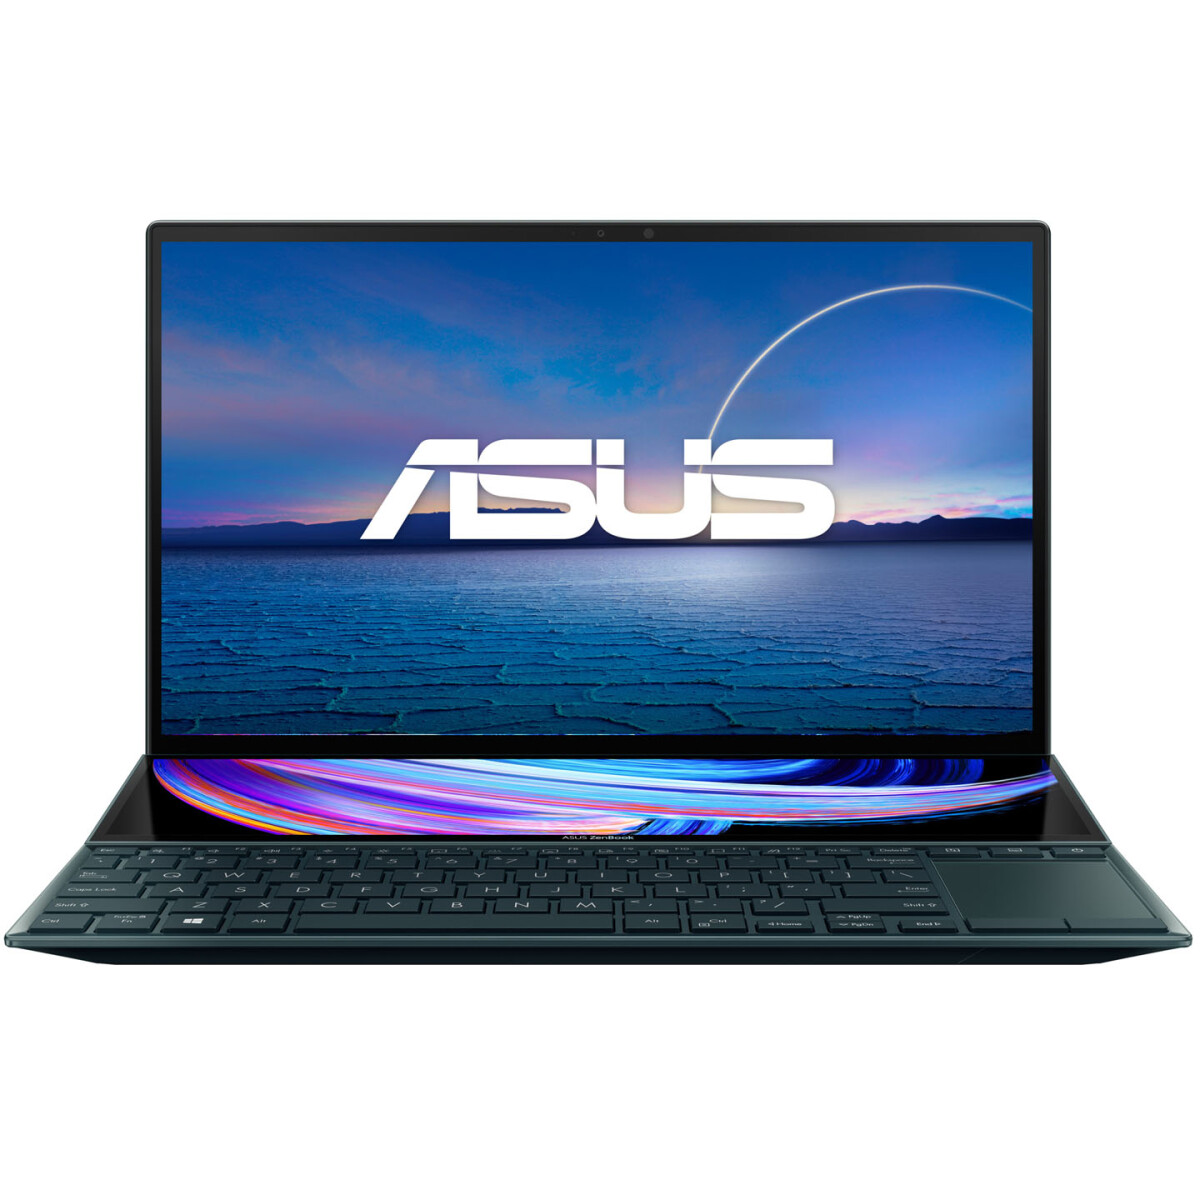 Notebook Asus Zenbook Duo Core I7 4.8GHZ, 16GB, 1TB Ssd, 14''+12.7" Fhd Touch, MX450 2GB - 001 